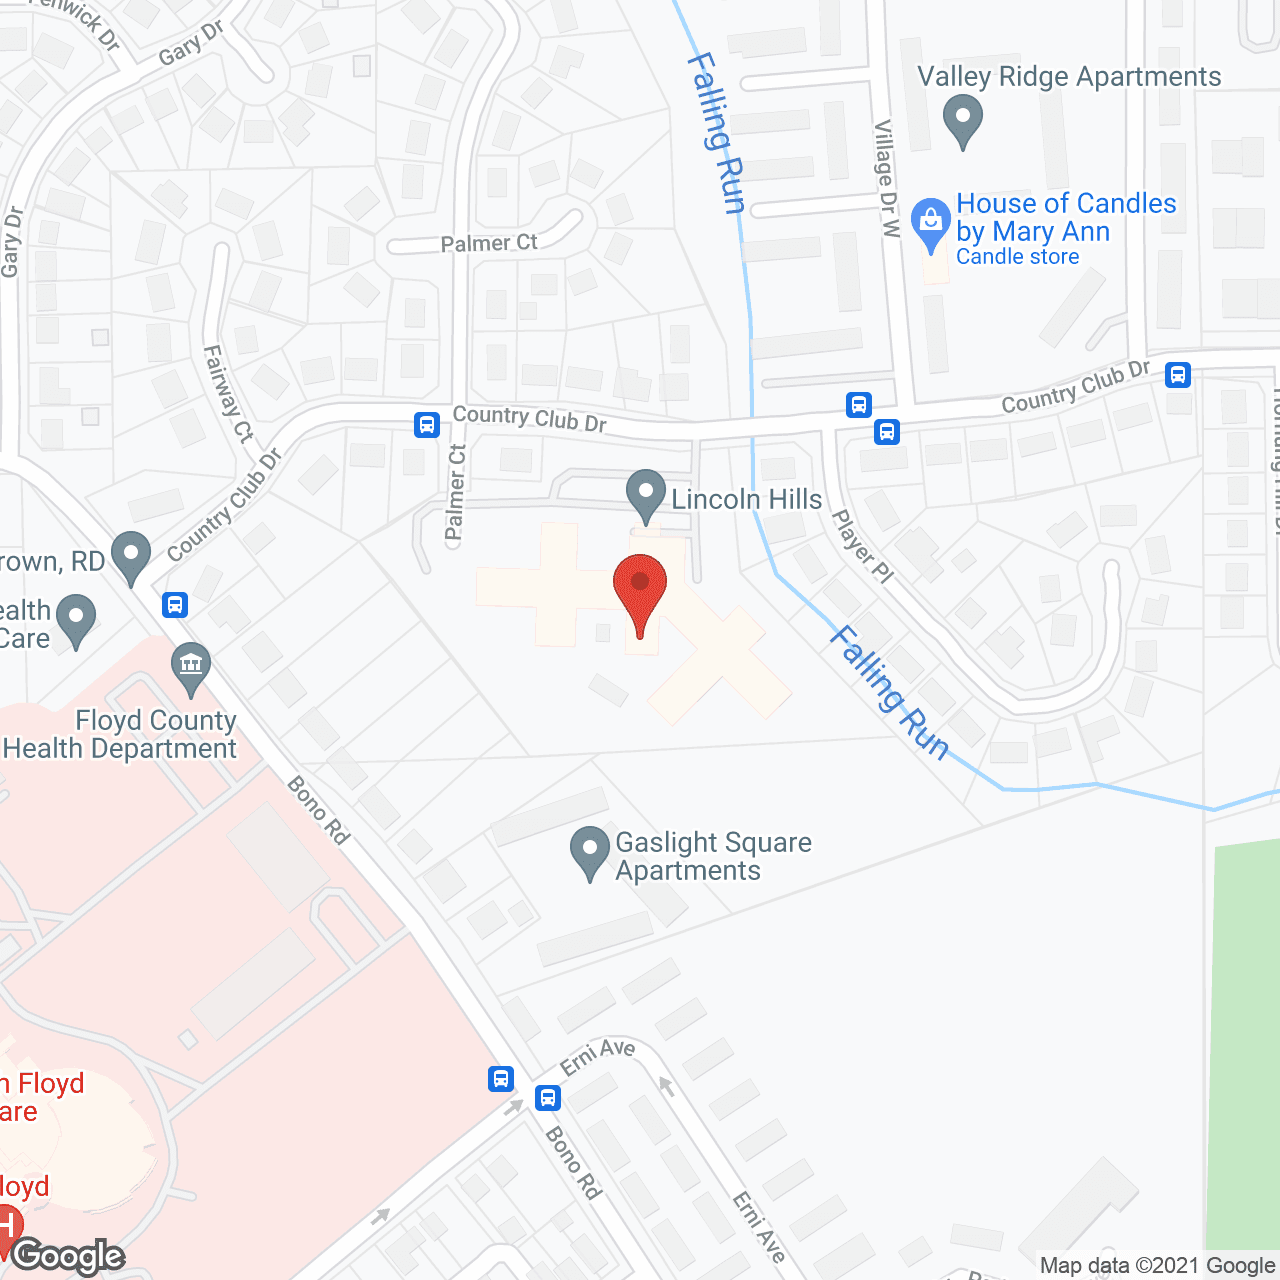 Lincoln Hills Health Ctr in google map